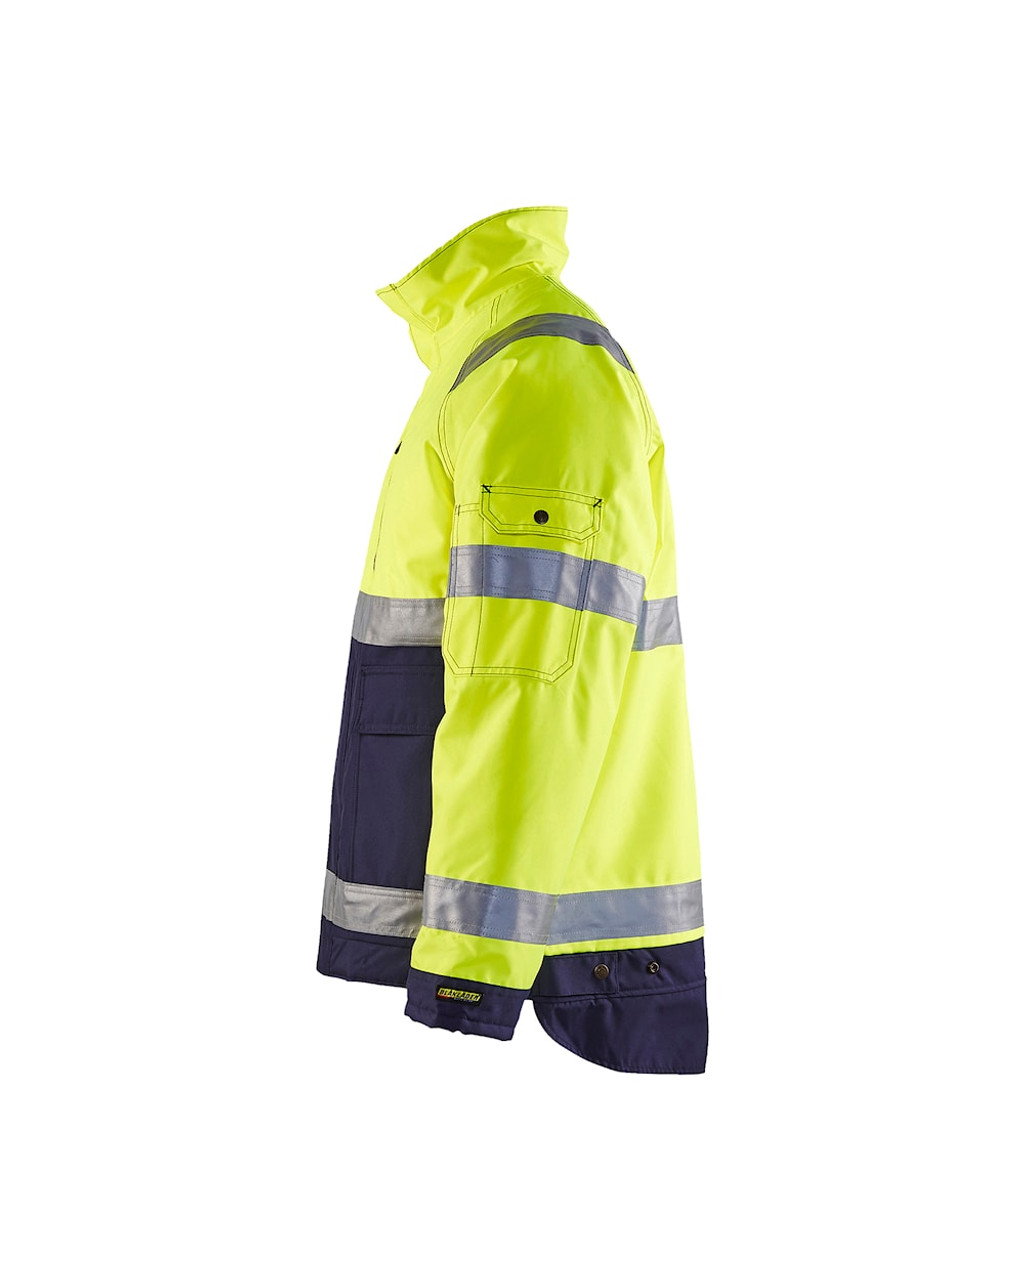 Buy online in Australia and New Zealand a Mens High Vis Yellow / Navy Blue Jacket  for Carpenters that are comfortable and durable.